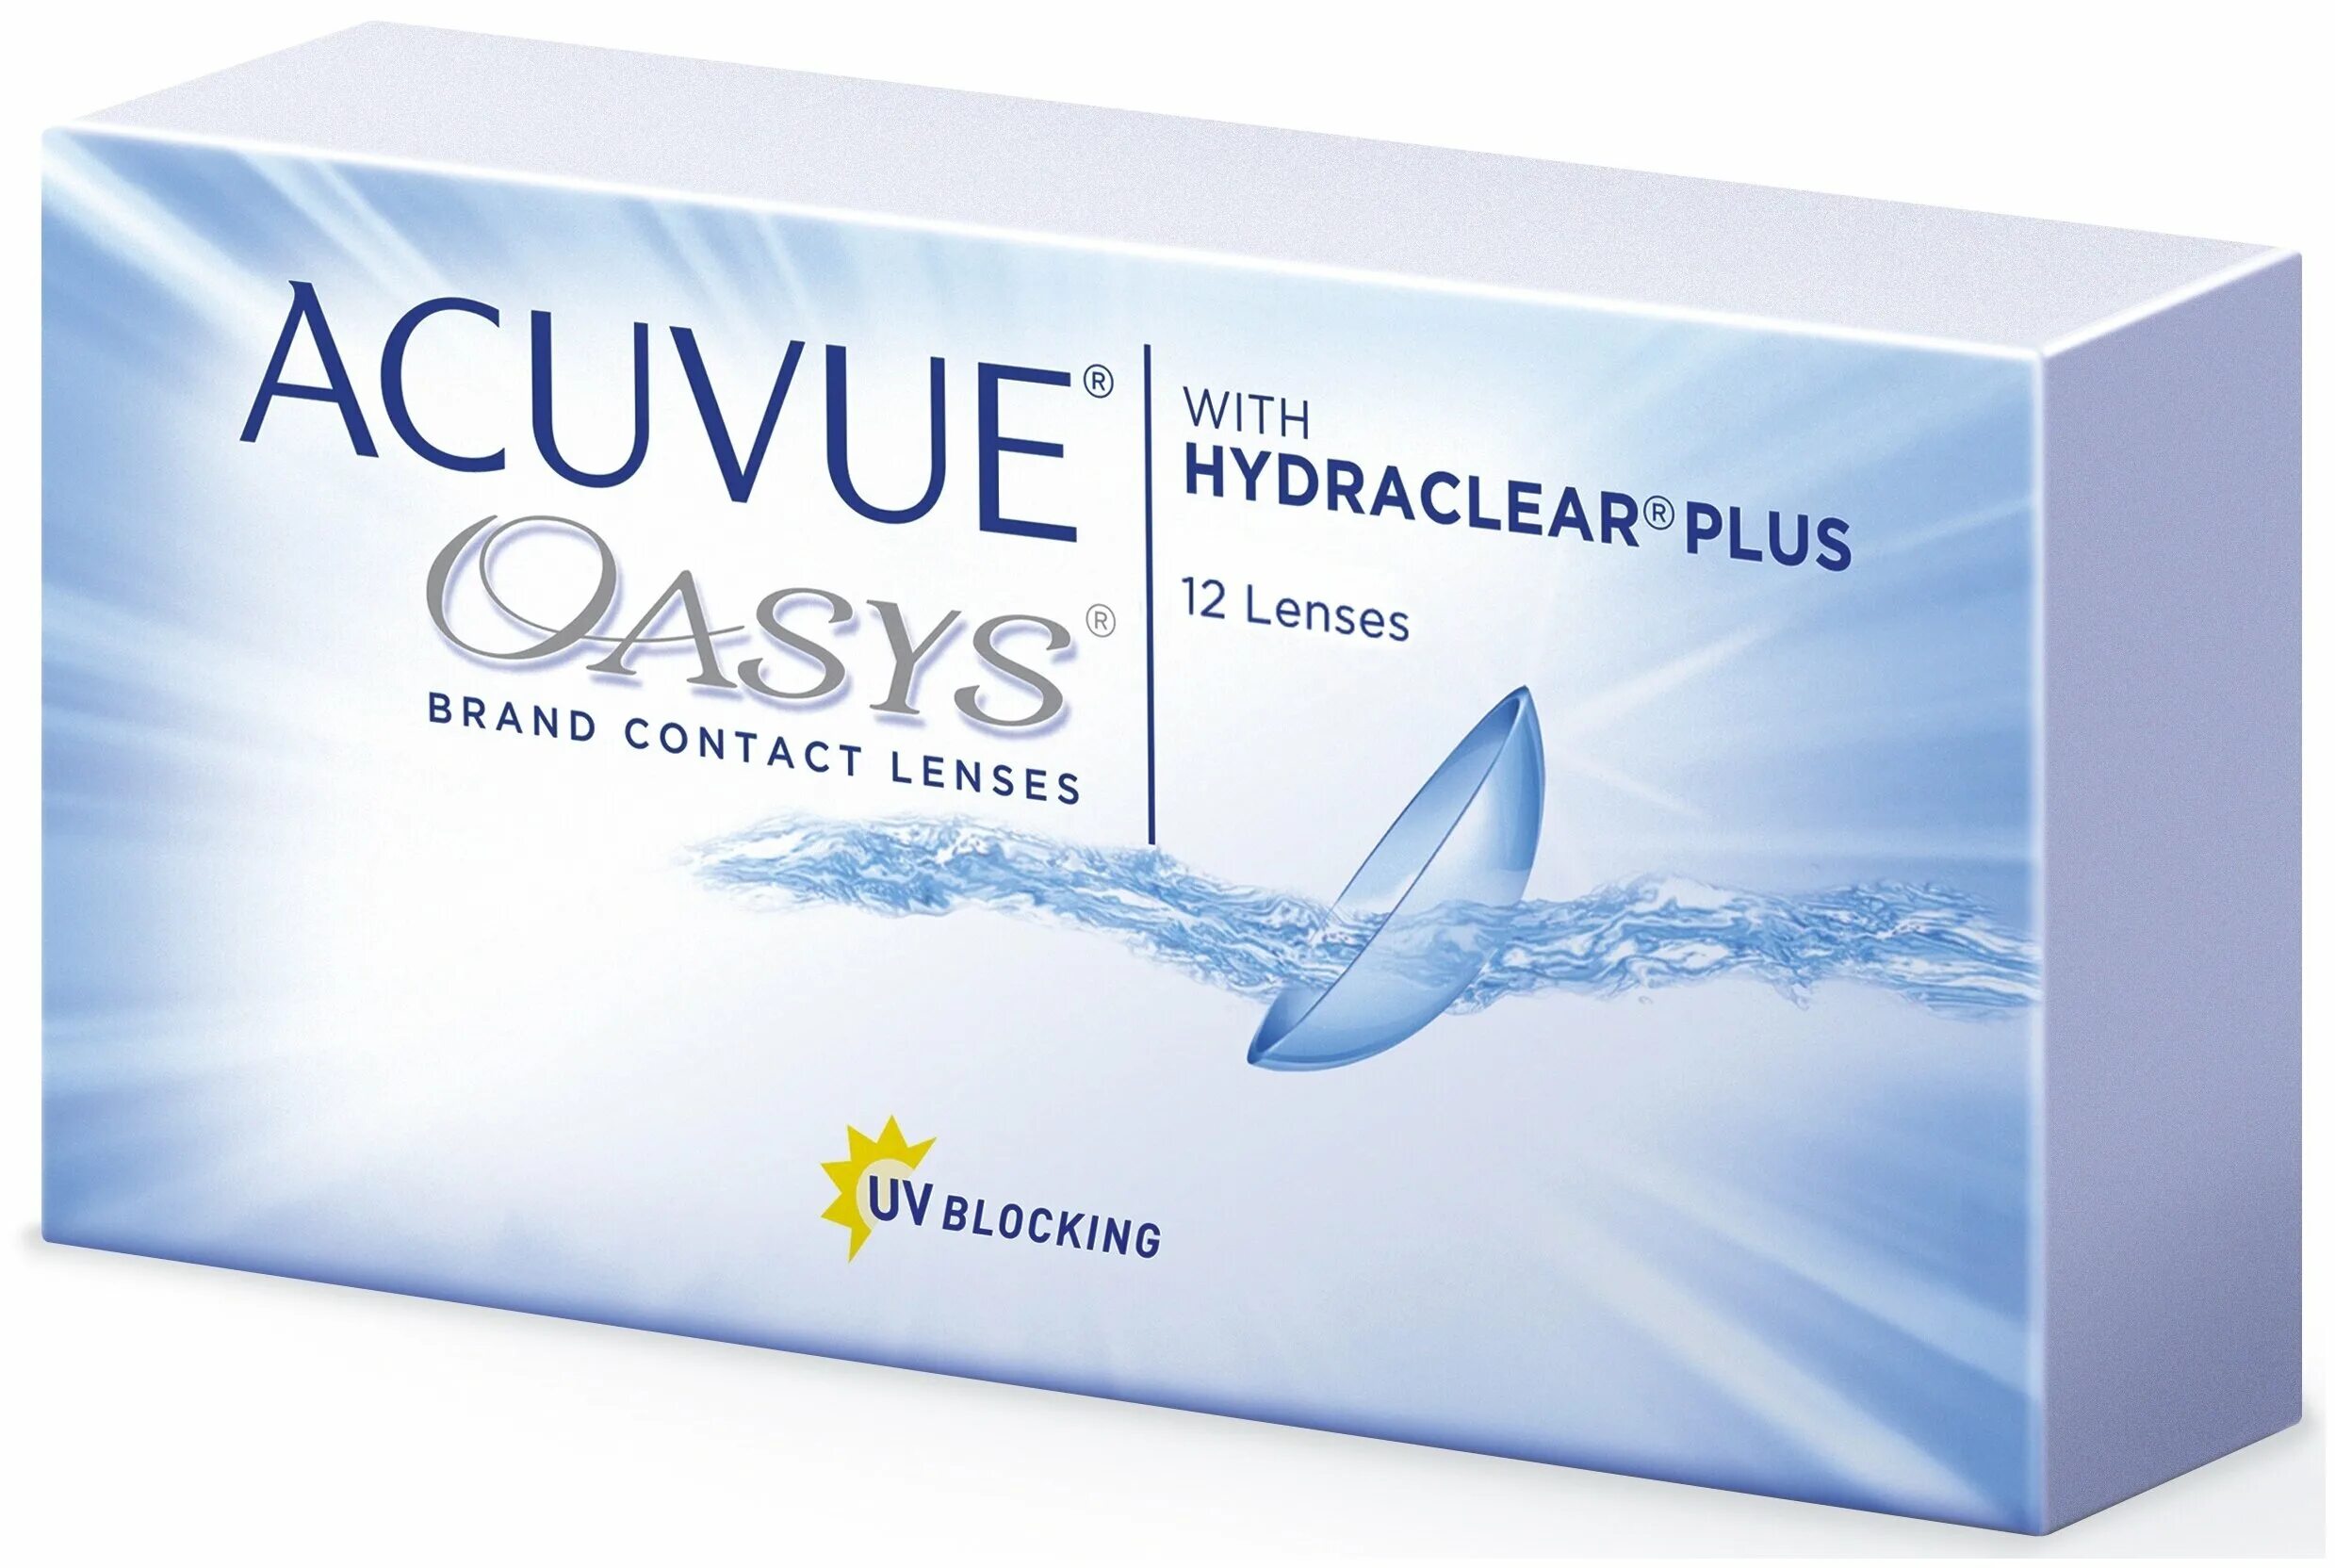 Acuvue Oasys with Hydraclear. Acuvue Oasys with Hydraclear Plus (12 линз). Acuvue Oasys for Astigmatism 6. Acuvue Oasys Hydraclear Plus. Линзы производители страны